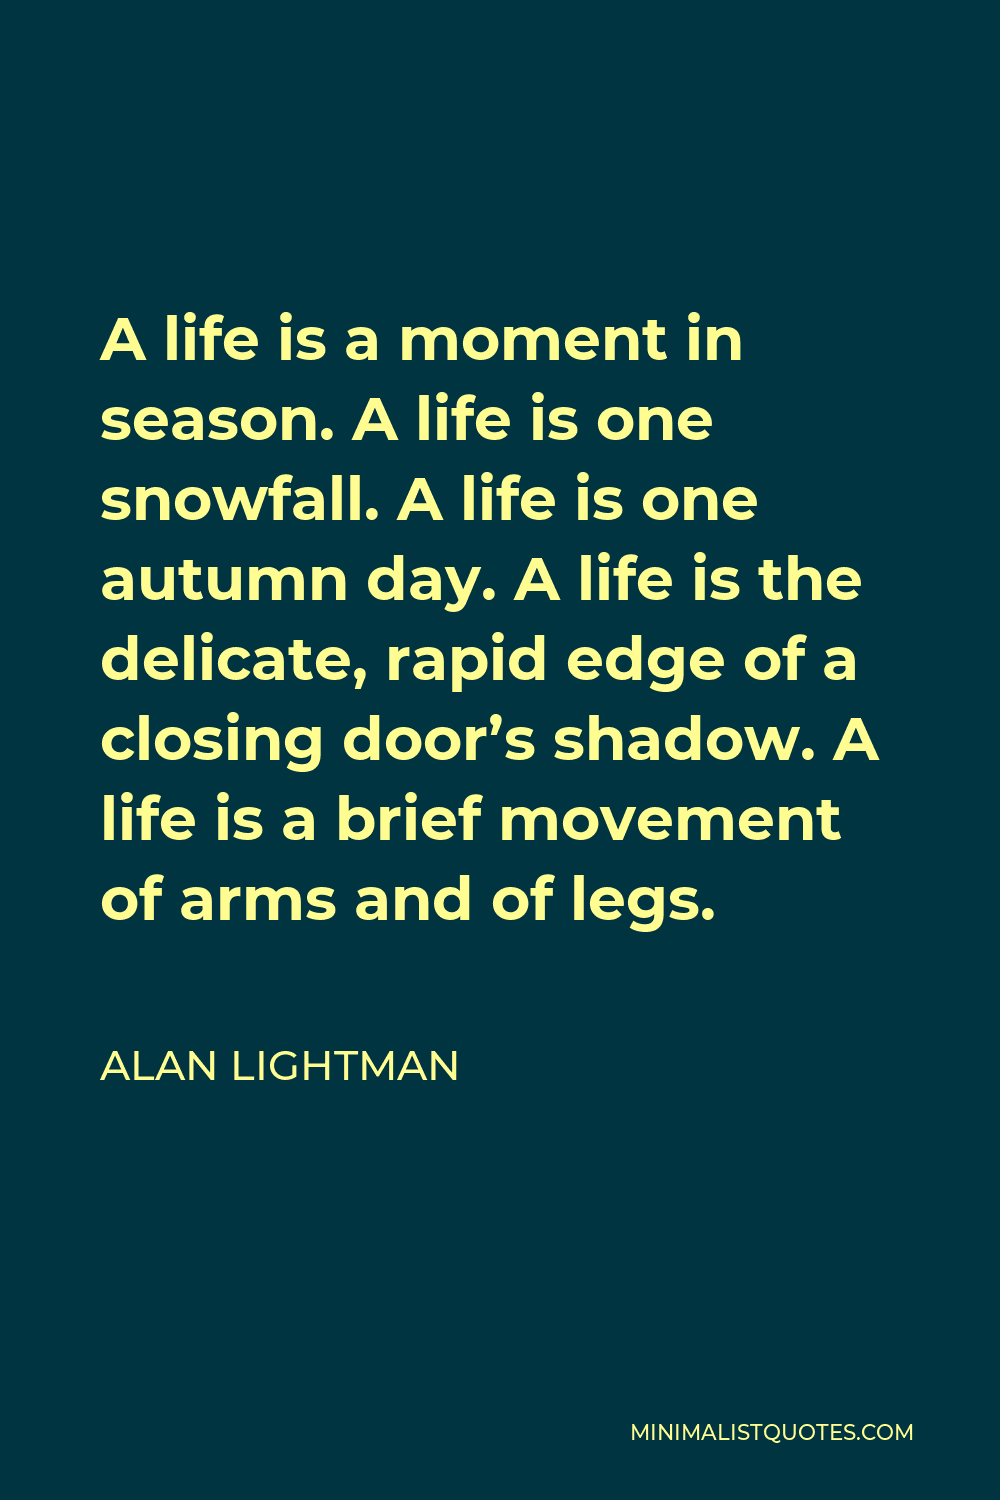 Alan Lightman Quote - A life is a moment in season. A life is one snowfall. A life is one autumn day. A life is the delicate, rapid edge of a closing door’s shadow. A life is a brief movement of arms and of legs.